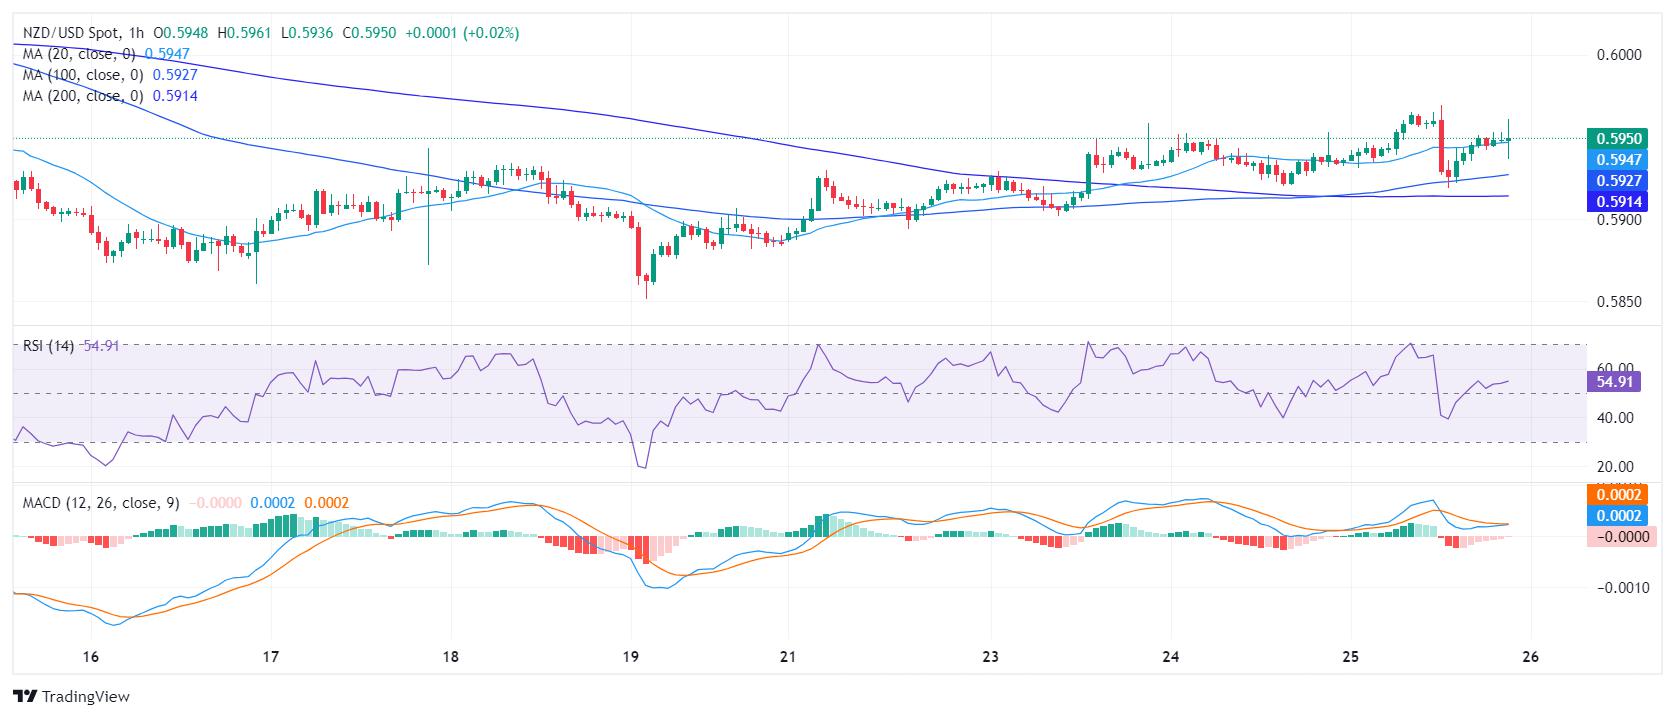 NZD/USD Price Analysis: Bears back off, potential trend reversal on cards tied to 20-day SMA recovery